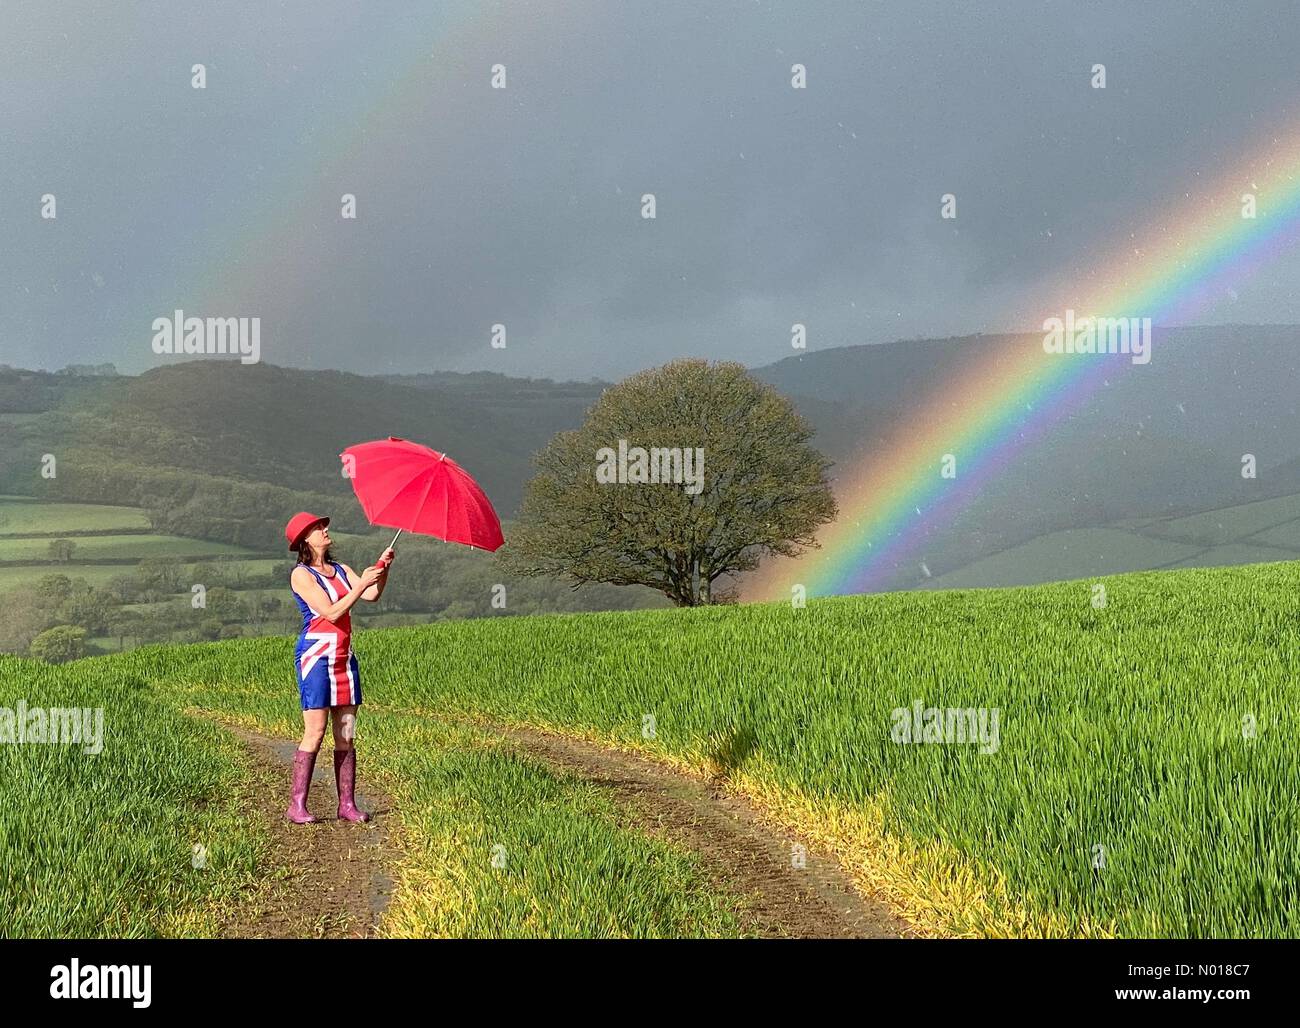 UK Weather: Raich Keene in Union Jack dress under a Colourful Rainbow in changeable conditions for Coronation weekend at Dunsford in Devon, UK. 5 May, 2023. Credit nidpor/ Alamy Live News Credit: nidpor/StockimoNews/Alamy Live News Stock Photo